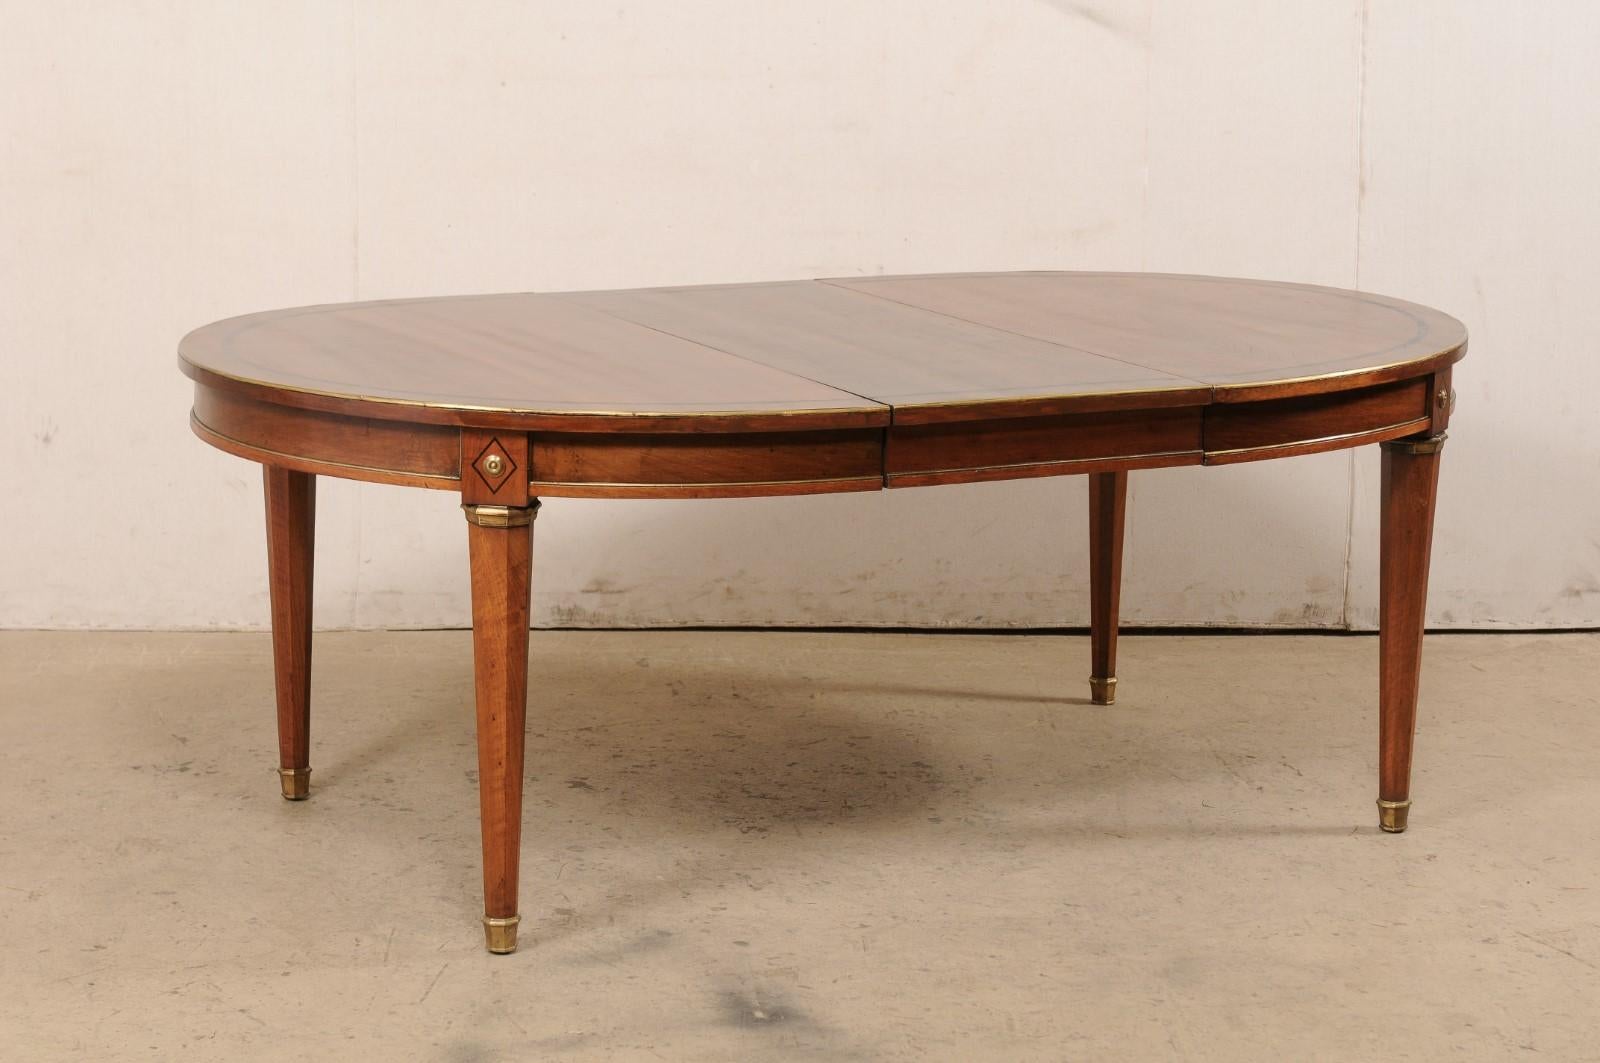 A French neoclassical style table dining table. This vintage table from France has an oval-shape with an oval inlay adorning its top. Brass trim outlines the top edge as well as the clean lines of the skirt about the perimeter. Diamond shaped inlays